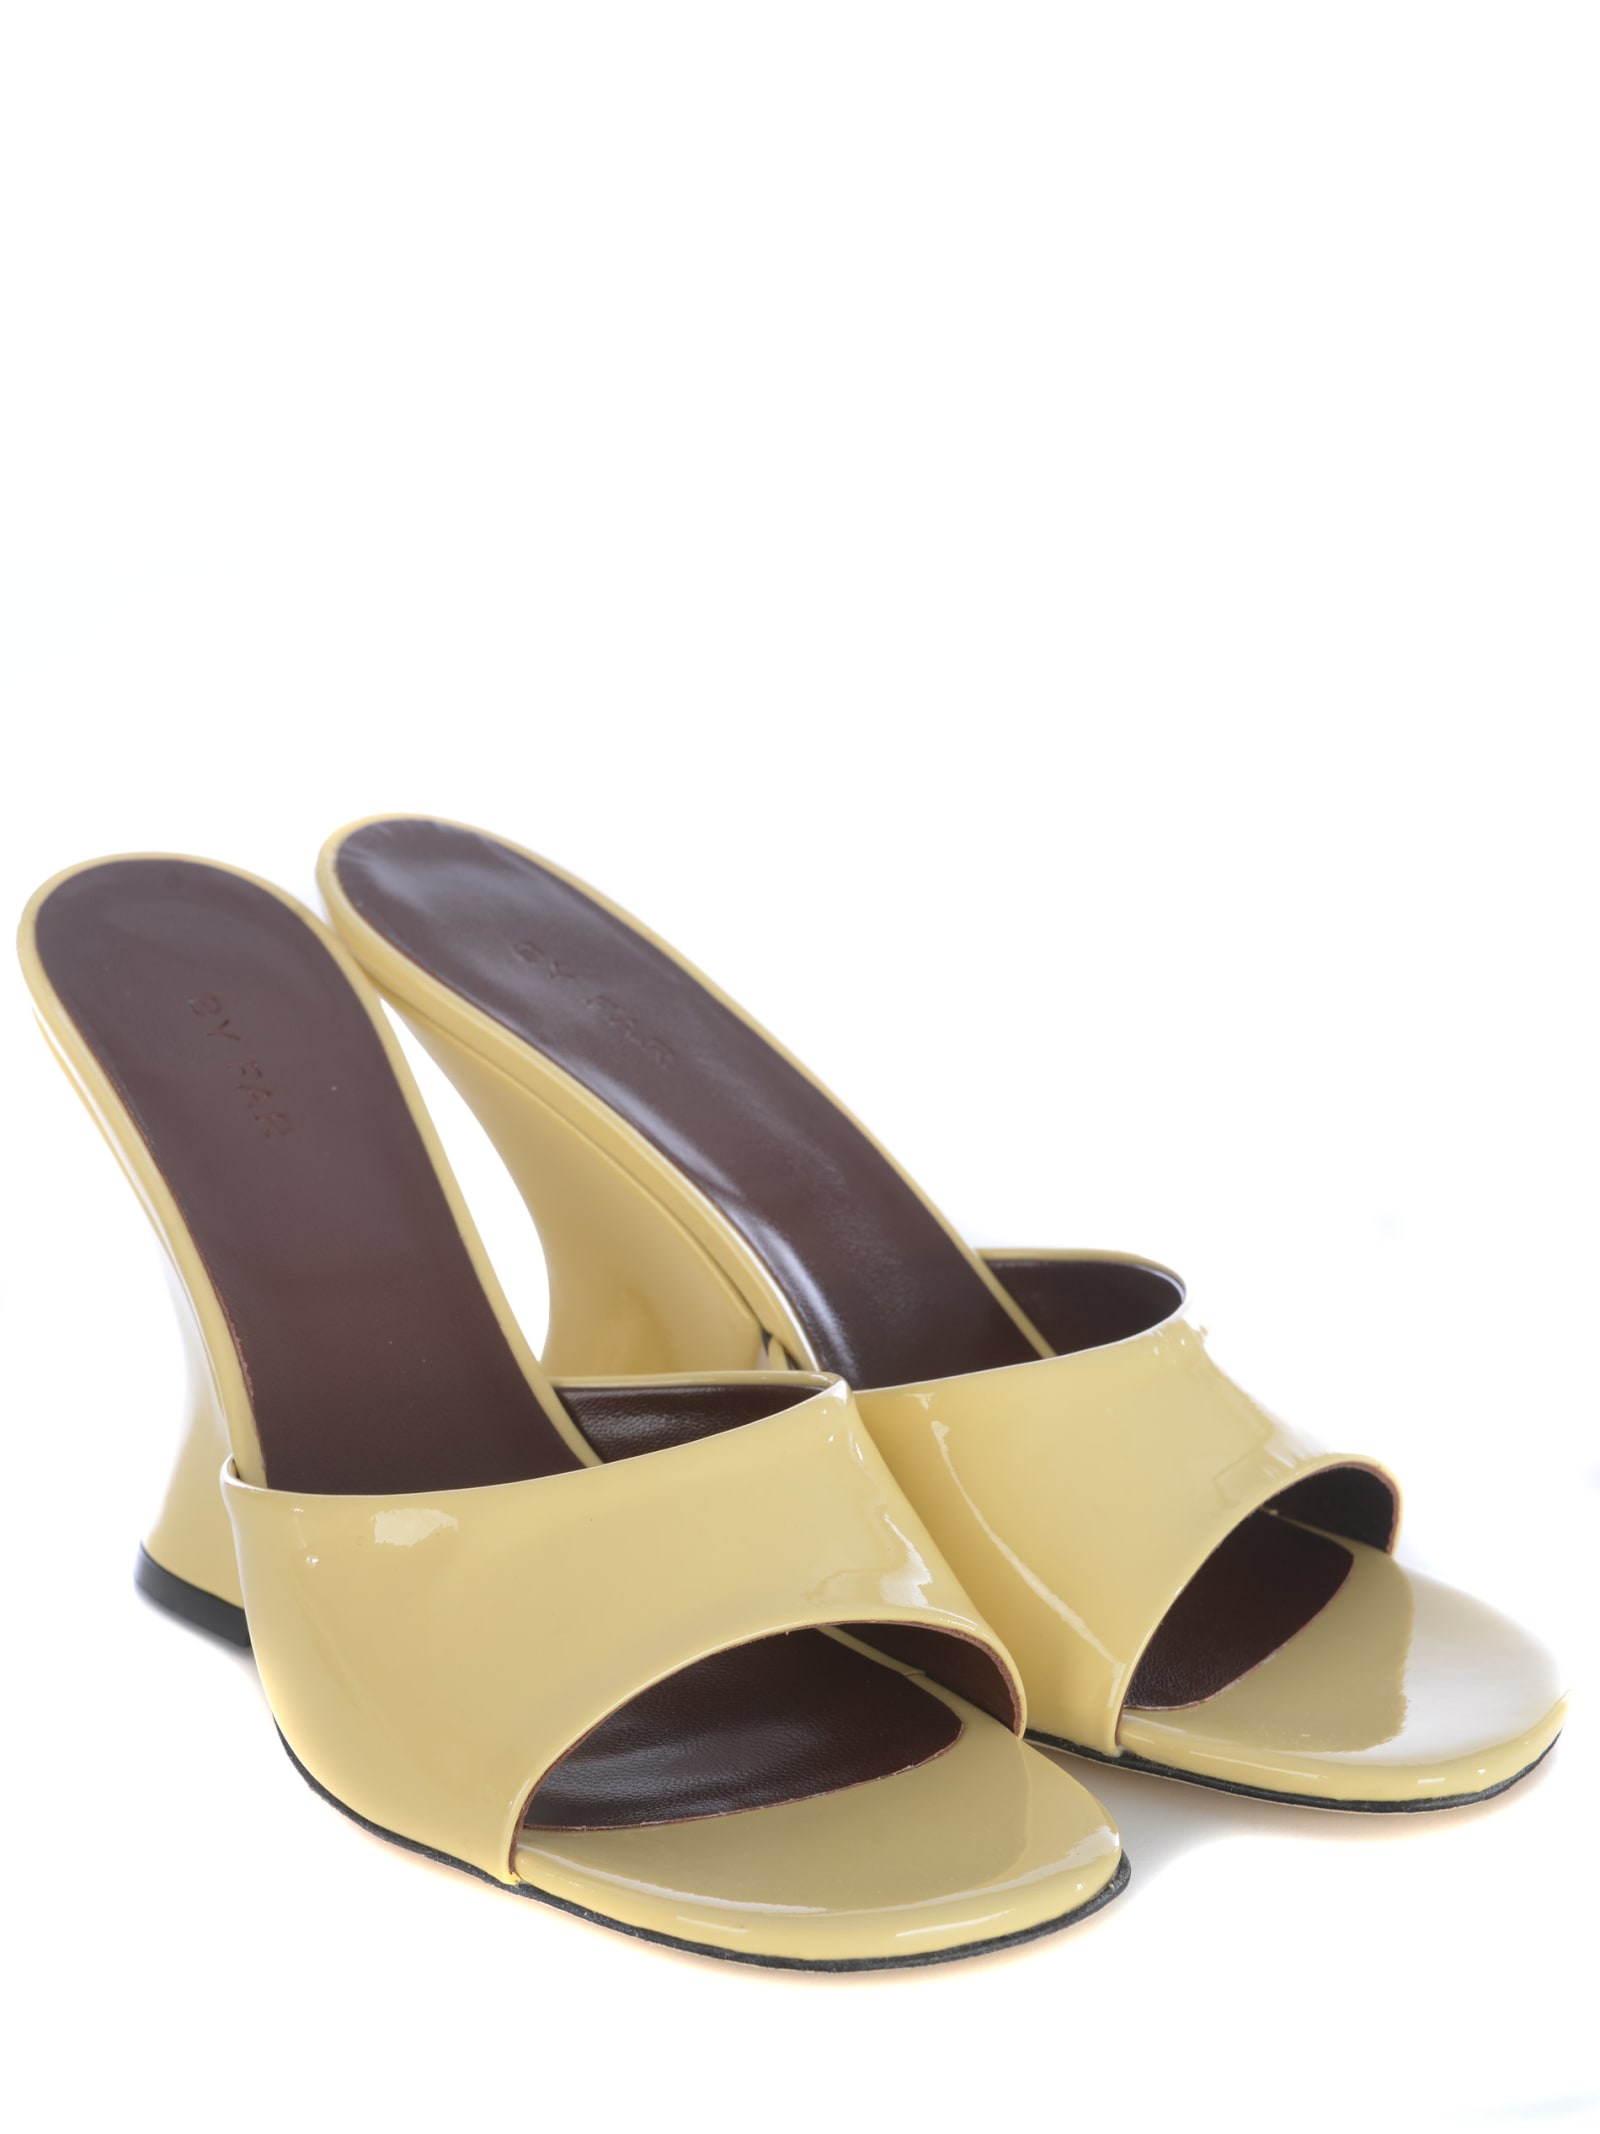 Shop By Far Sandal  Tais In Semi-gloss Leather Available Store Pompei In Avorio